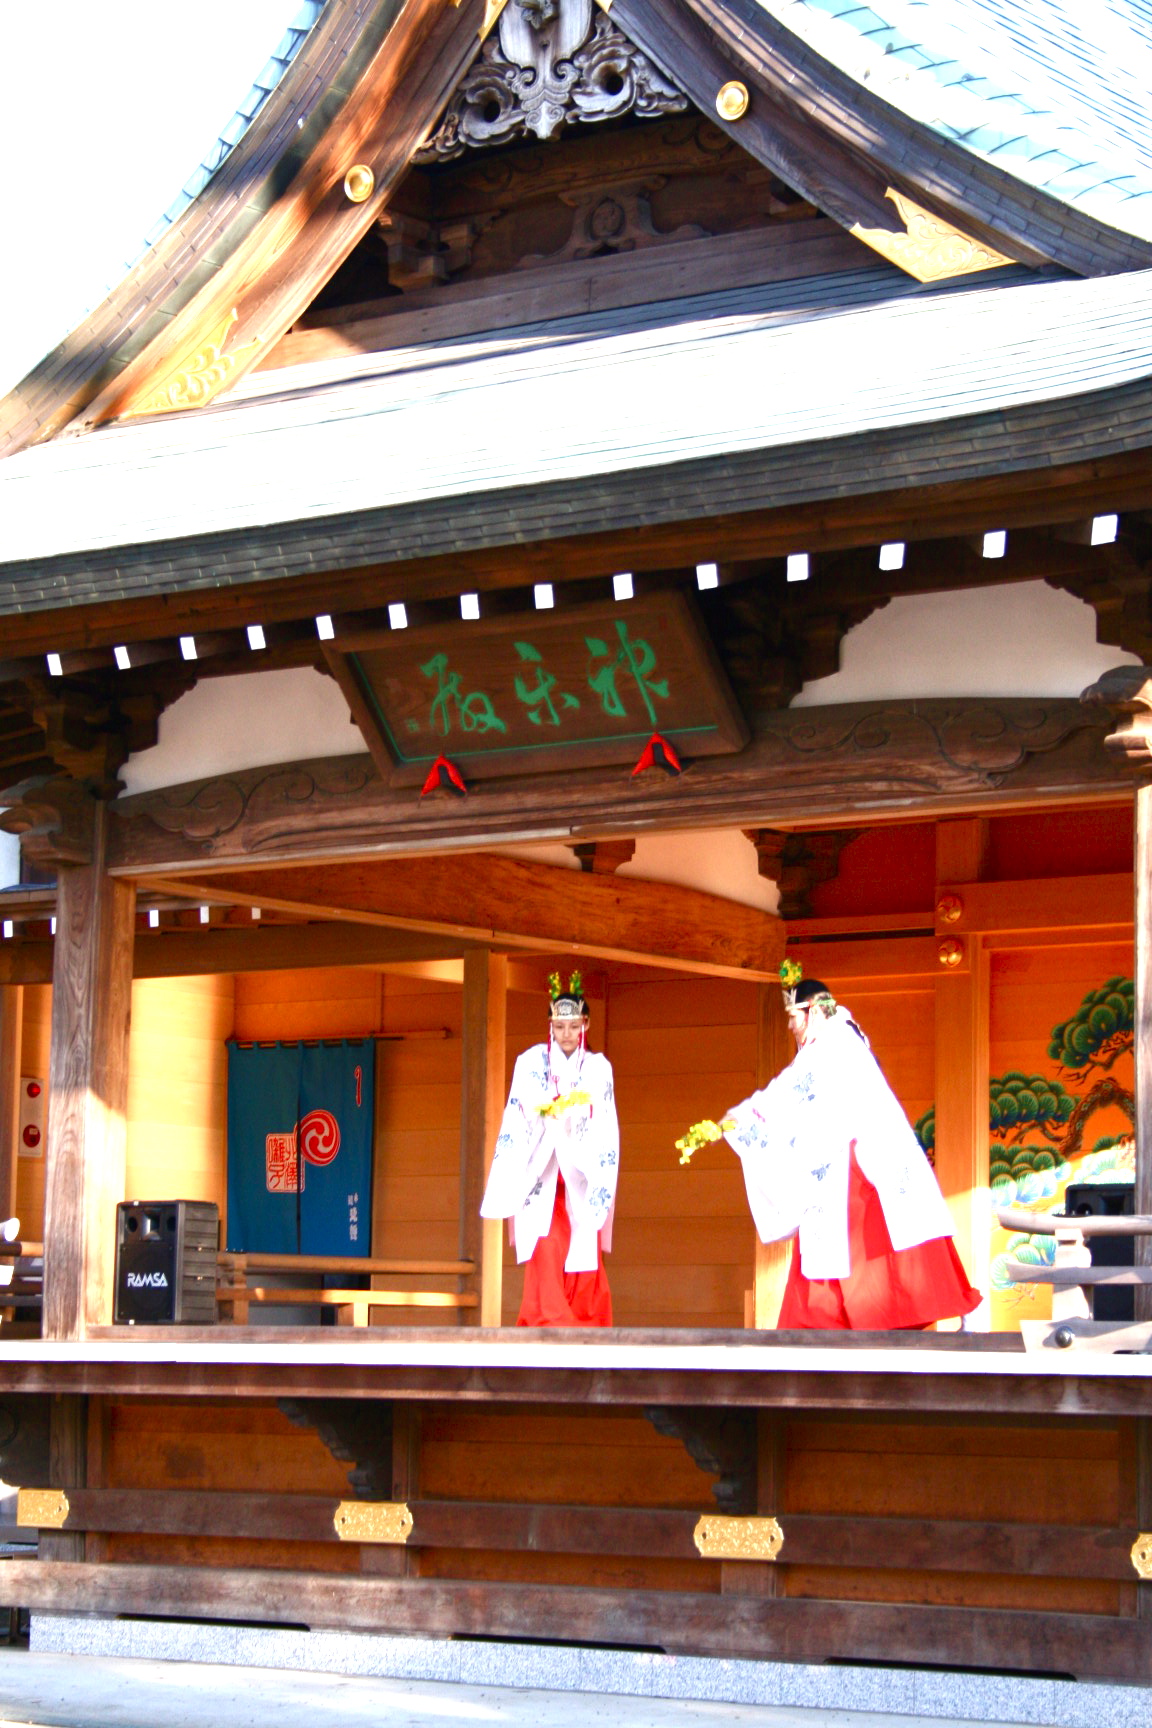 a small shrine with red and white attire and white robe on it